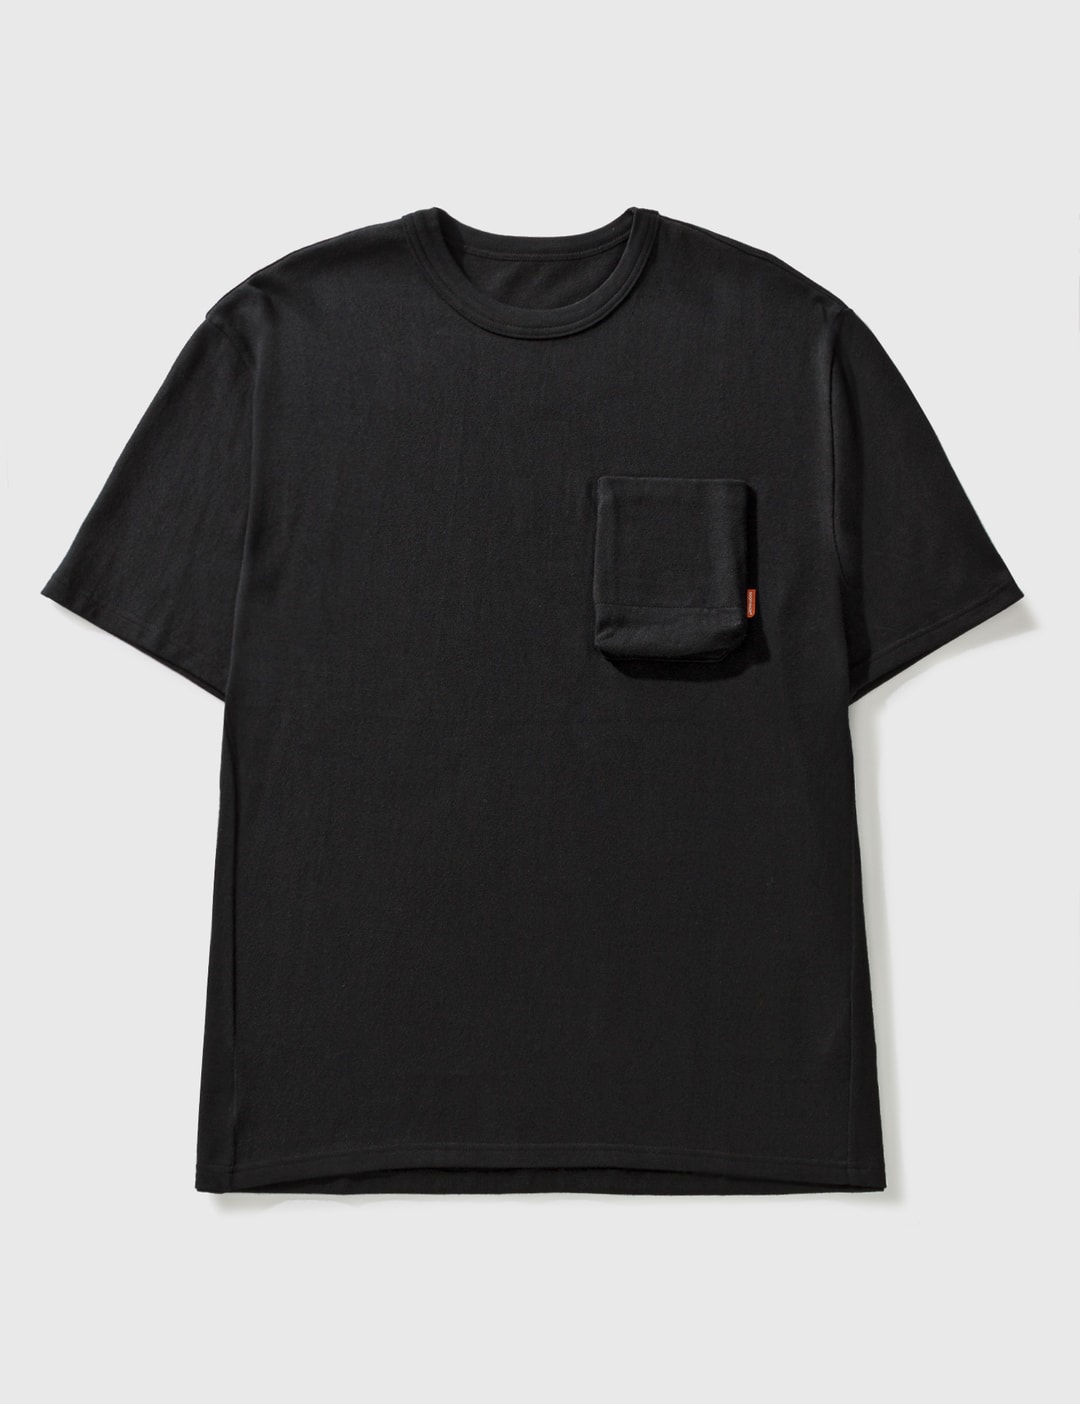 GOOPiMADE - GOOPiMADE® Type-X 3D Pocket T-shirt II  HBX - Globally Curated  Fashion and Lifestyle by Hypebeast